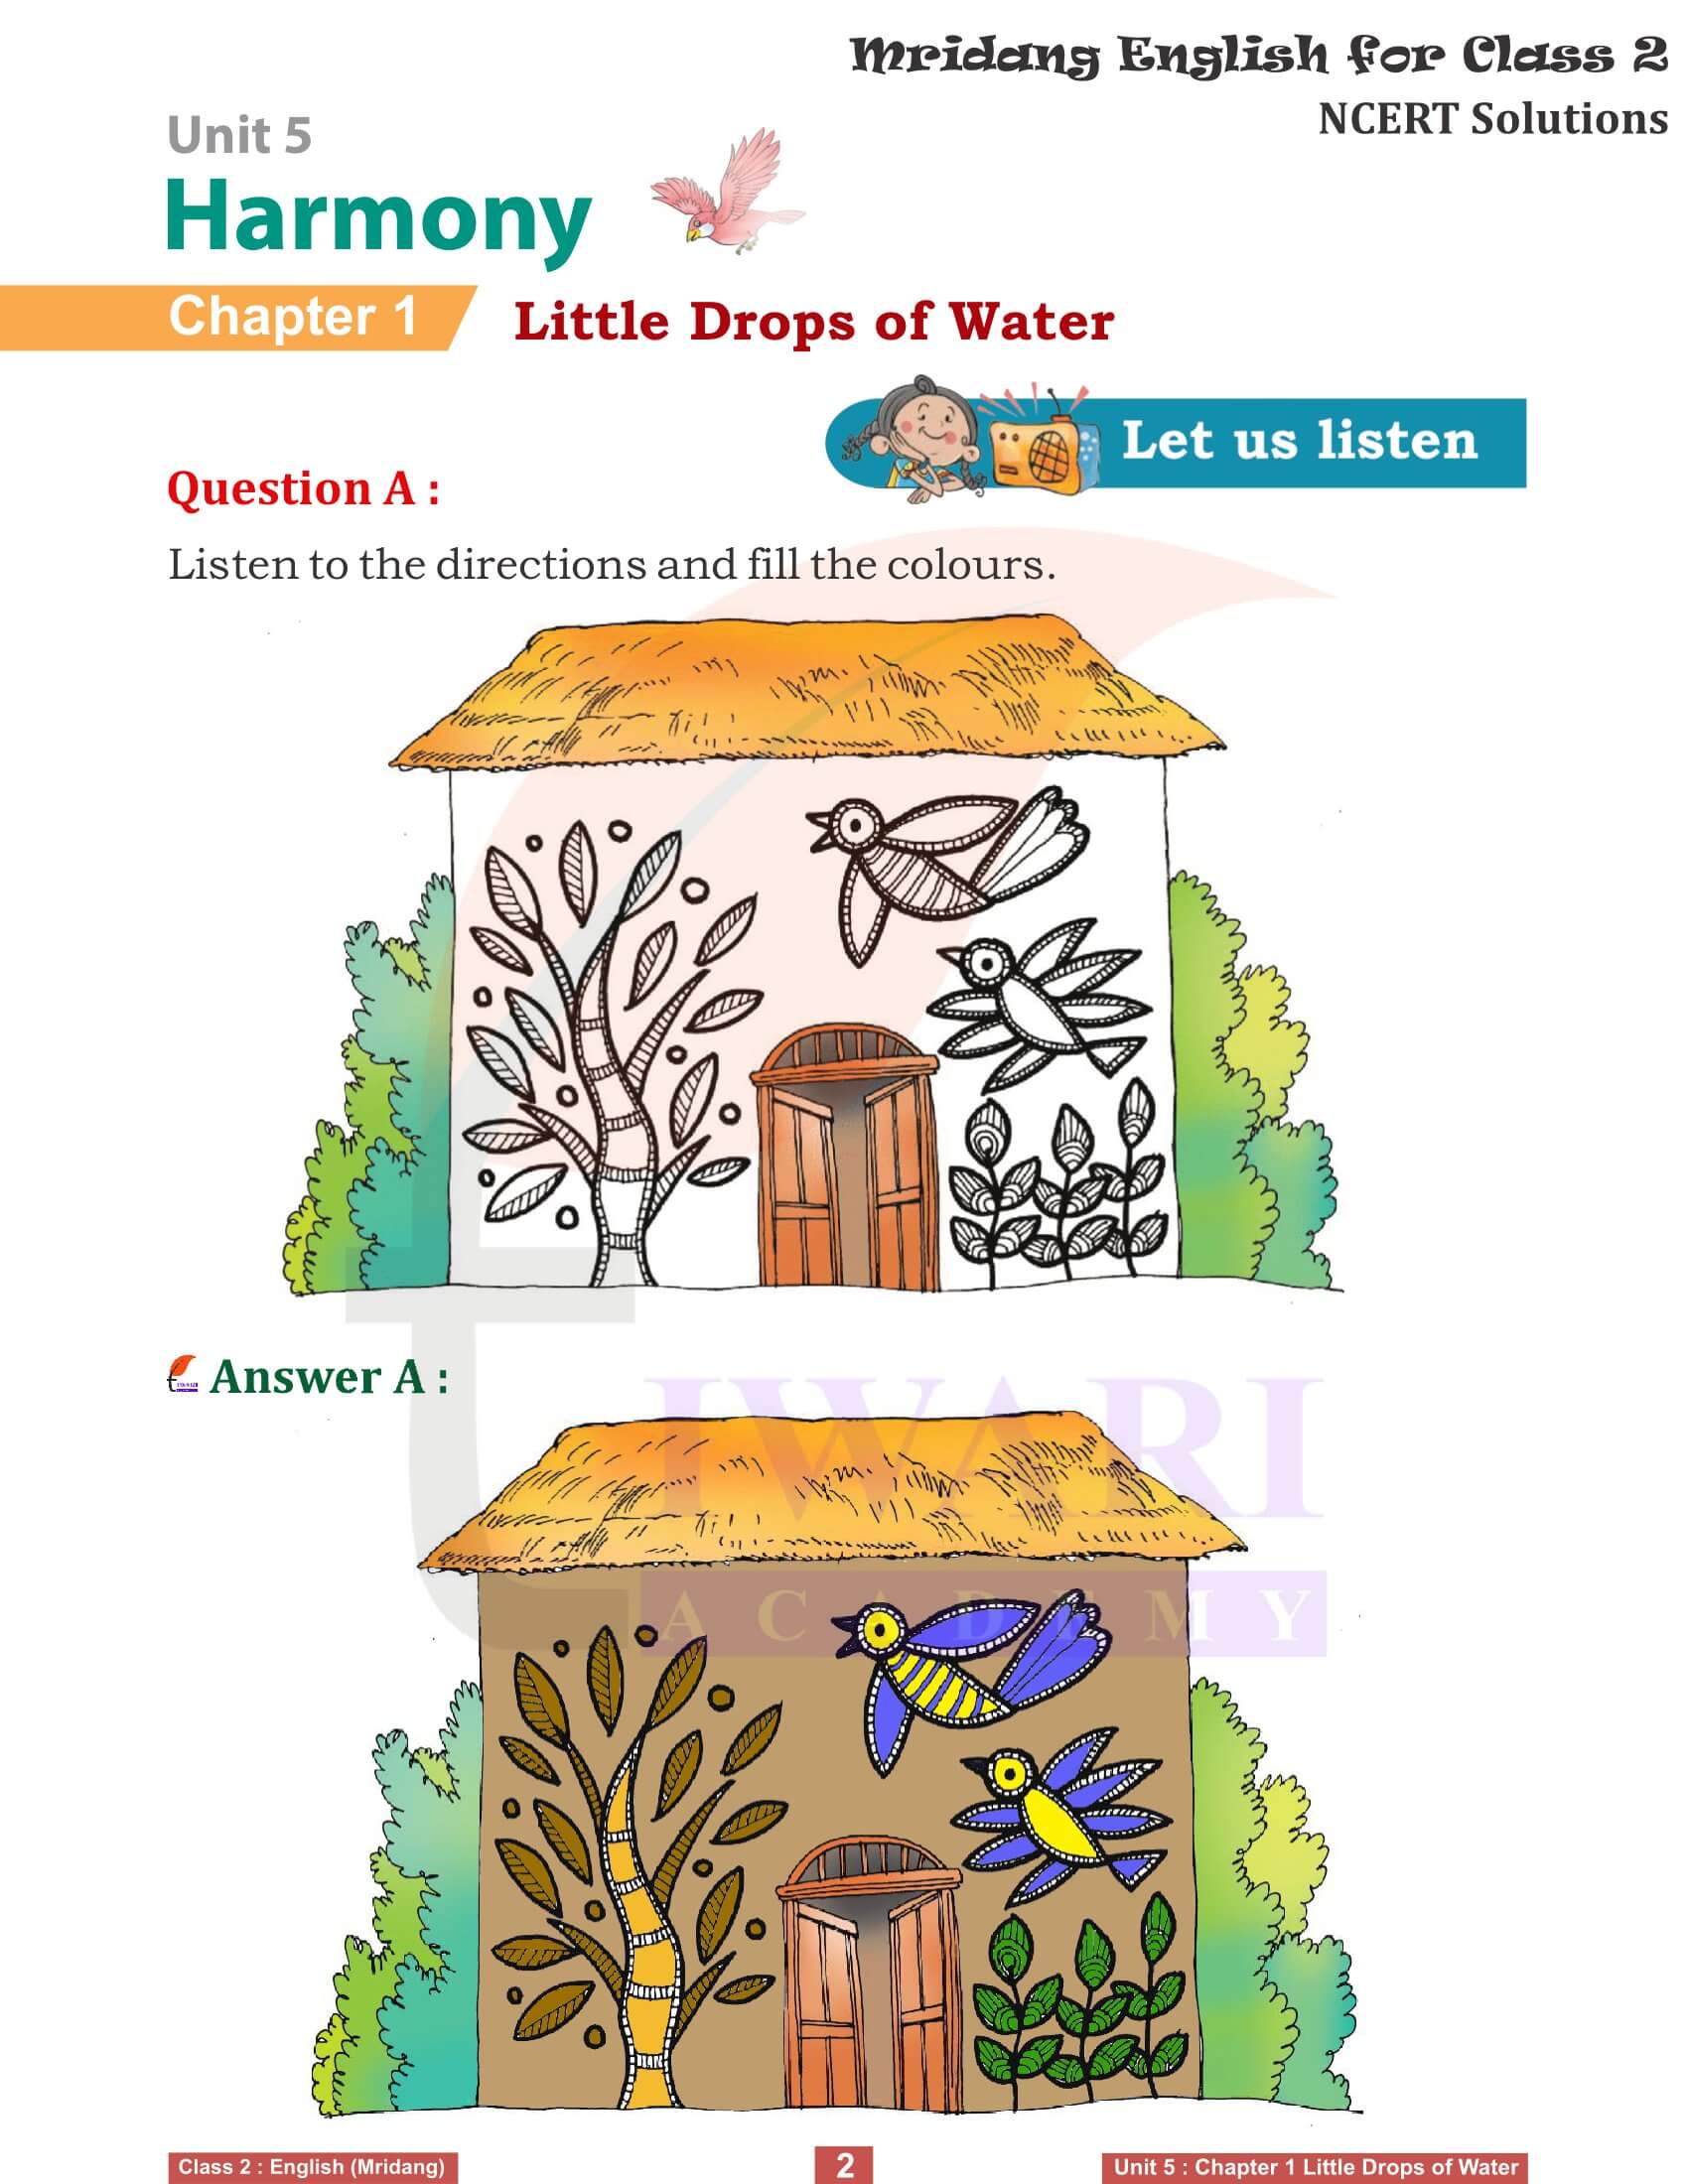 Class 2 English Mridang Unit 5 Harmony Chapter 1 Little Drops of Water Solutions